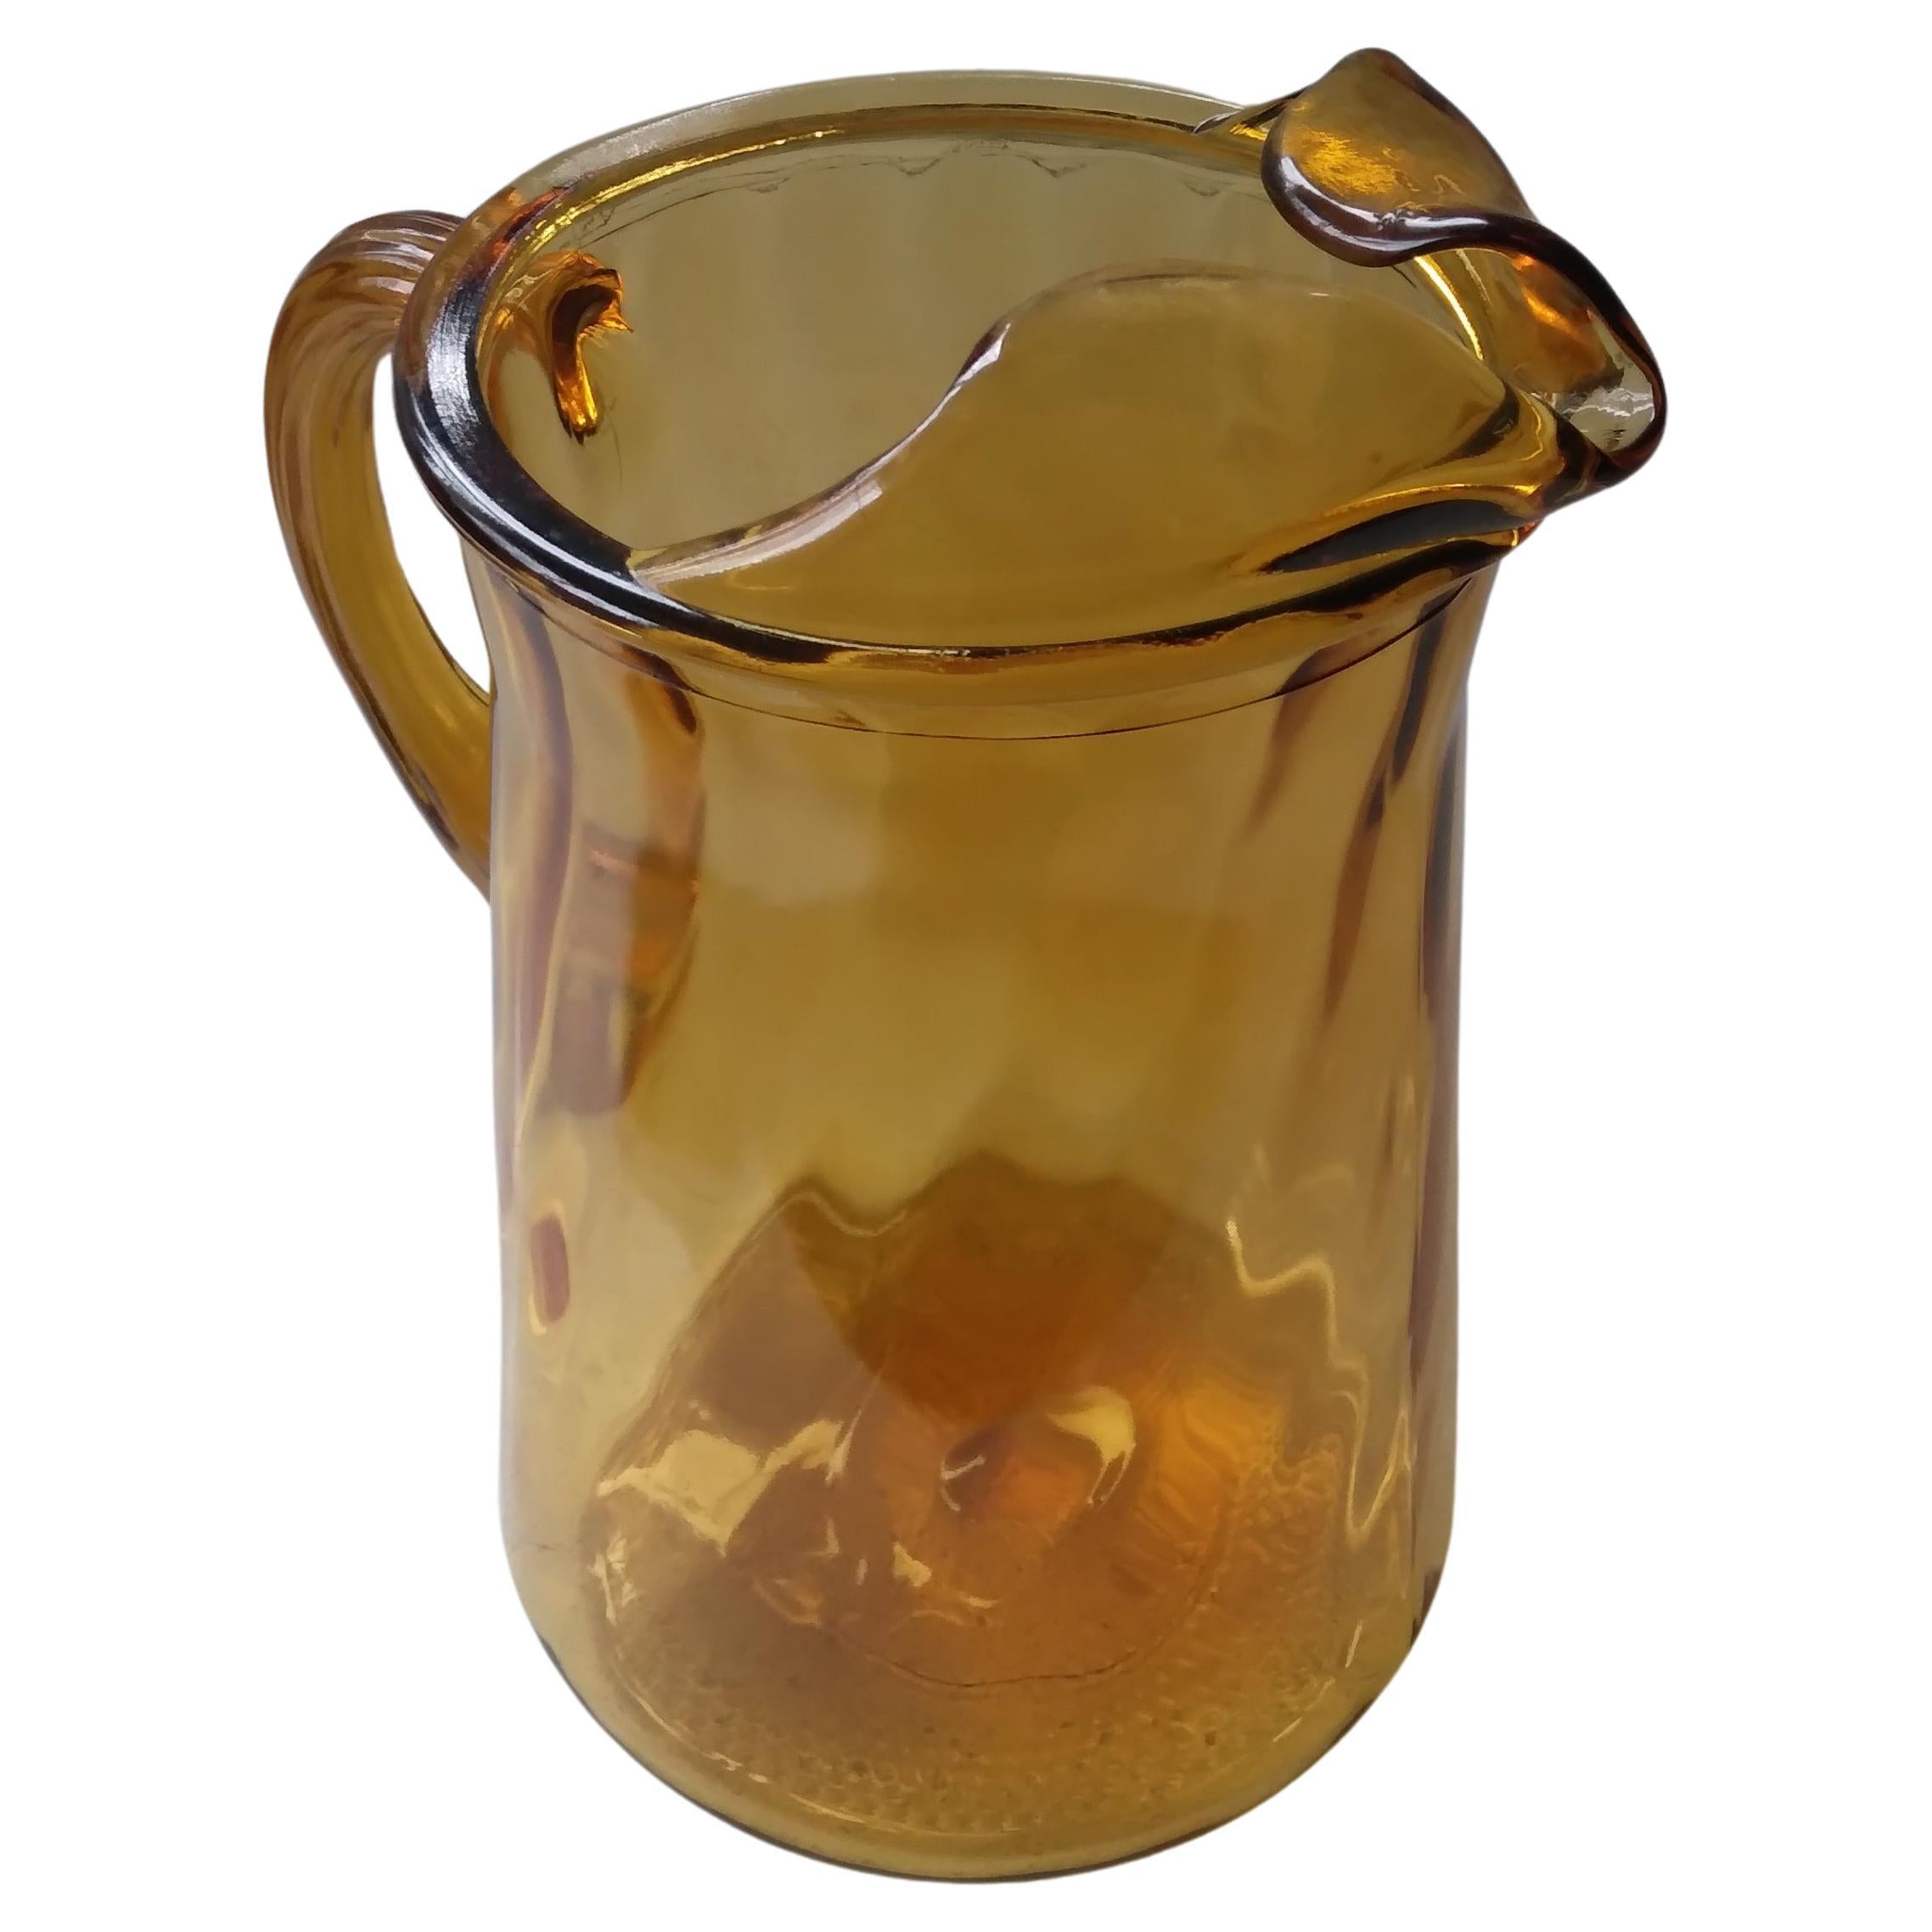 Vintage Amber Glass Pitcher with Swirl Pattern